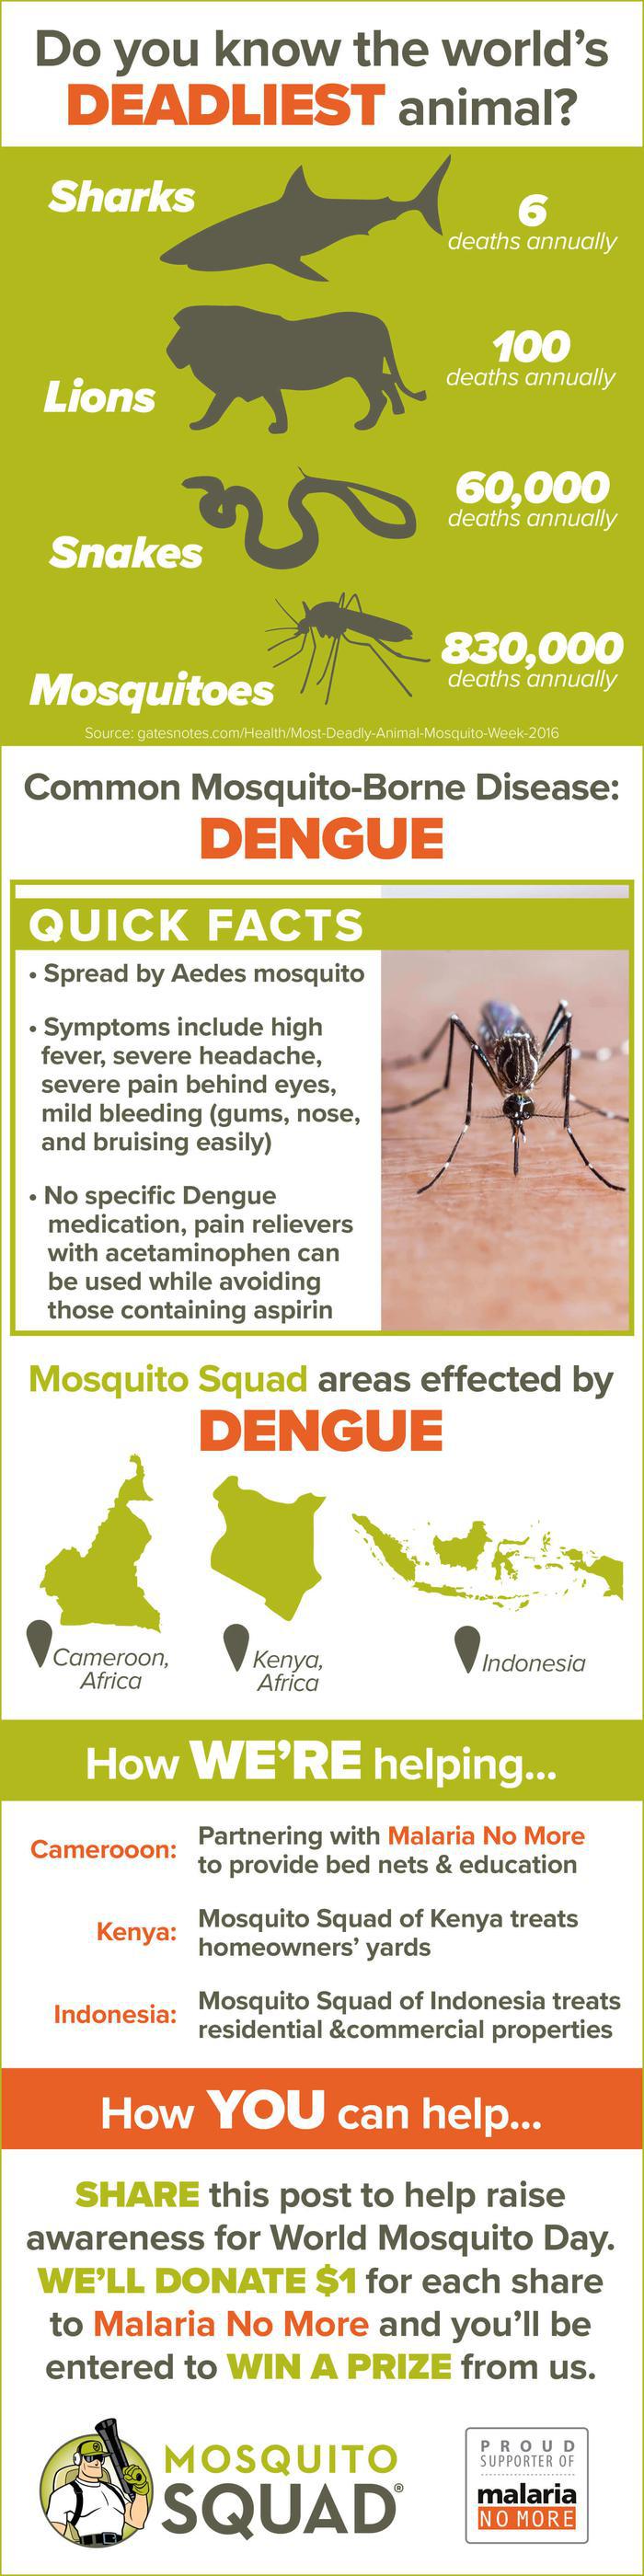 Dengue Virus Facts to Know Before World Mosquito Day